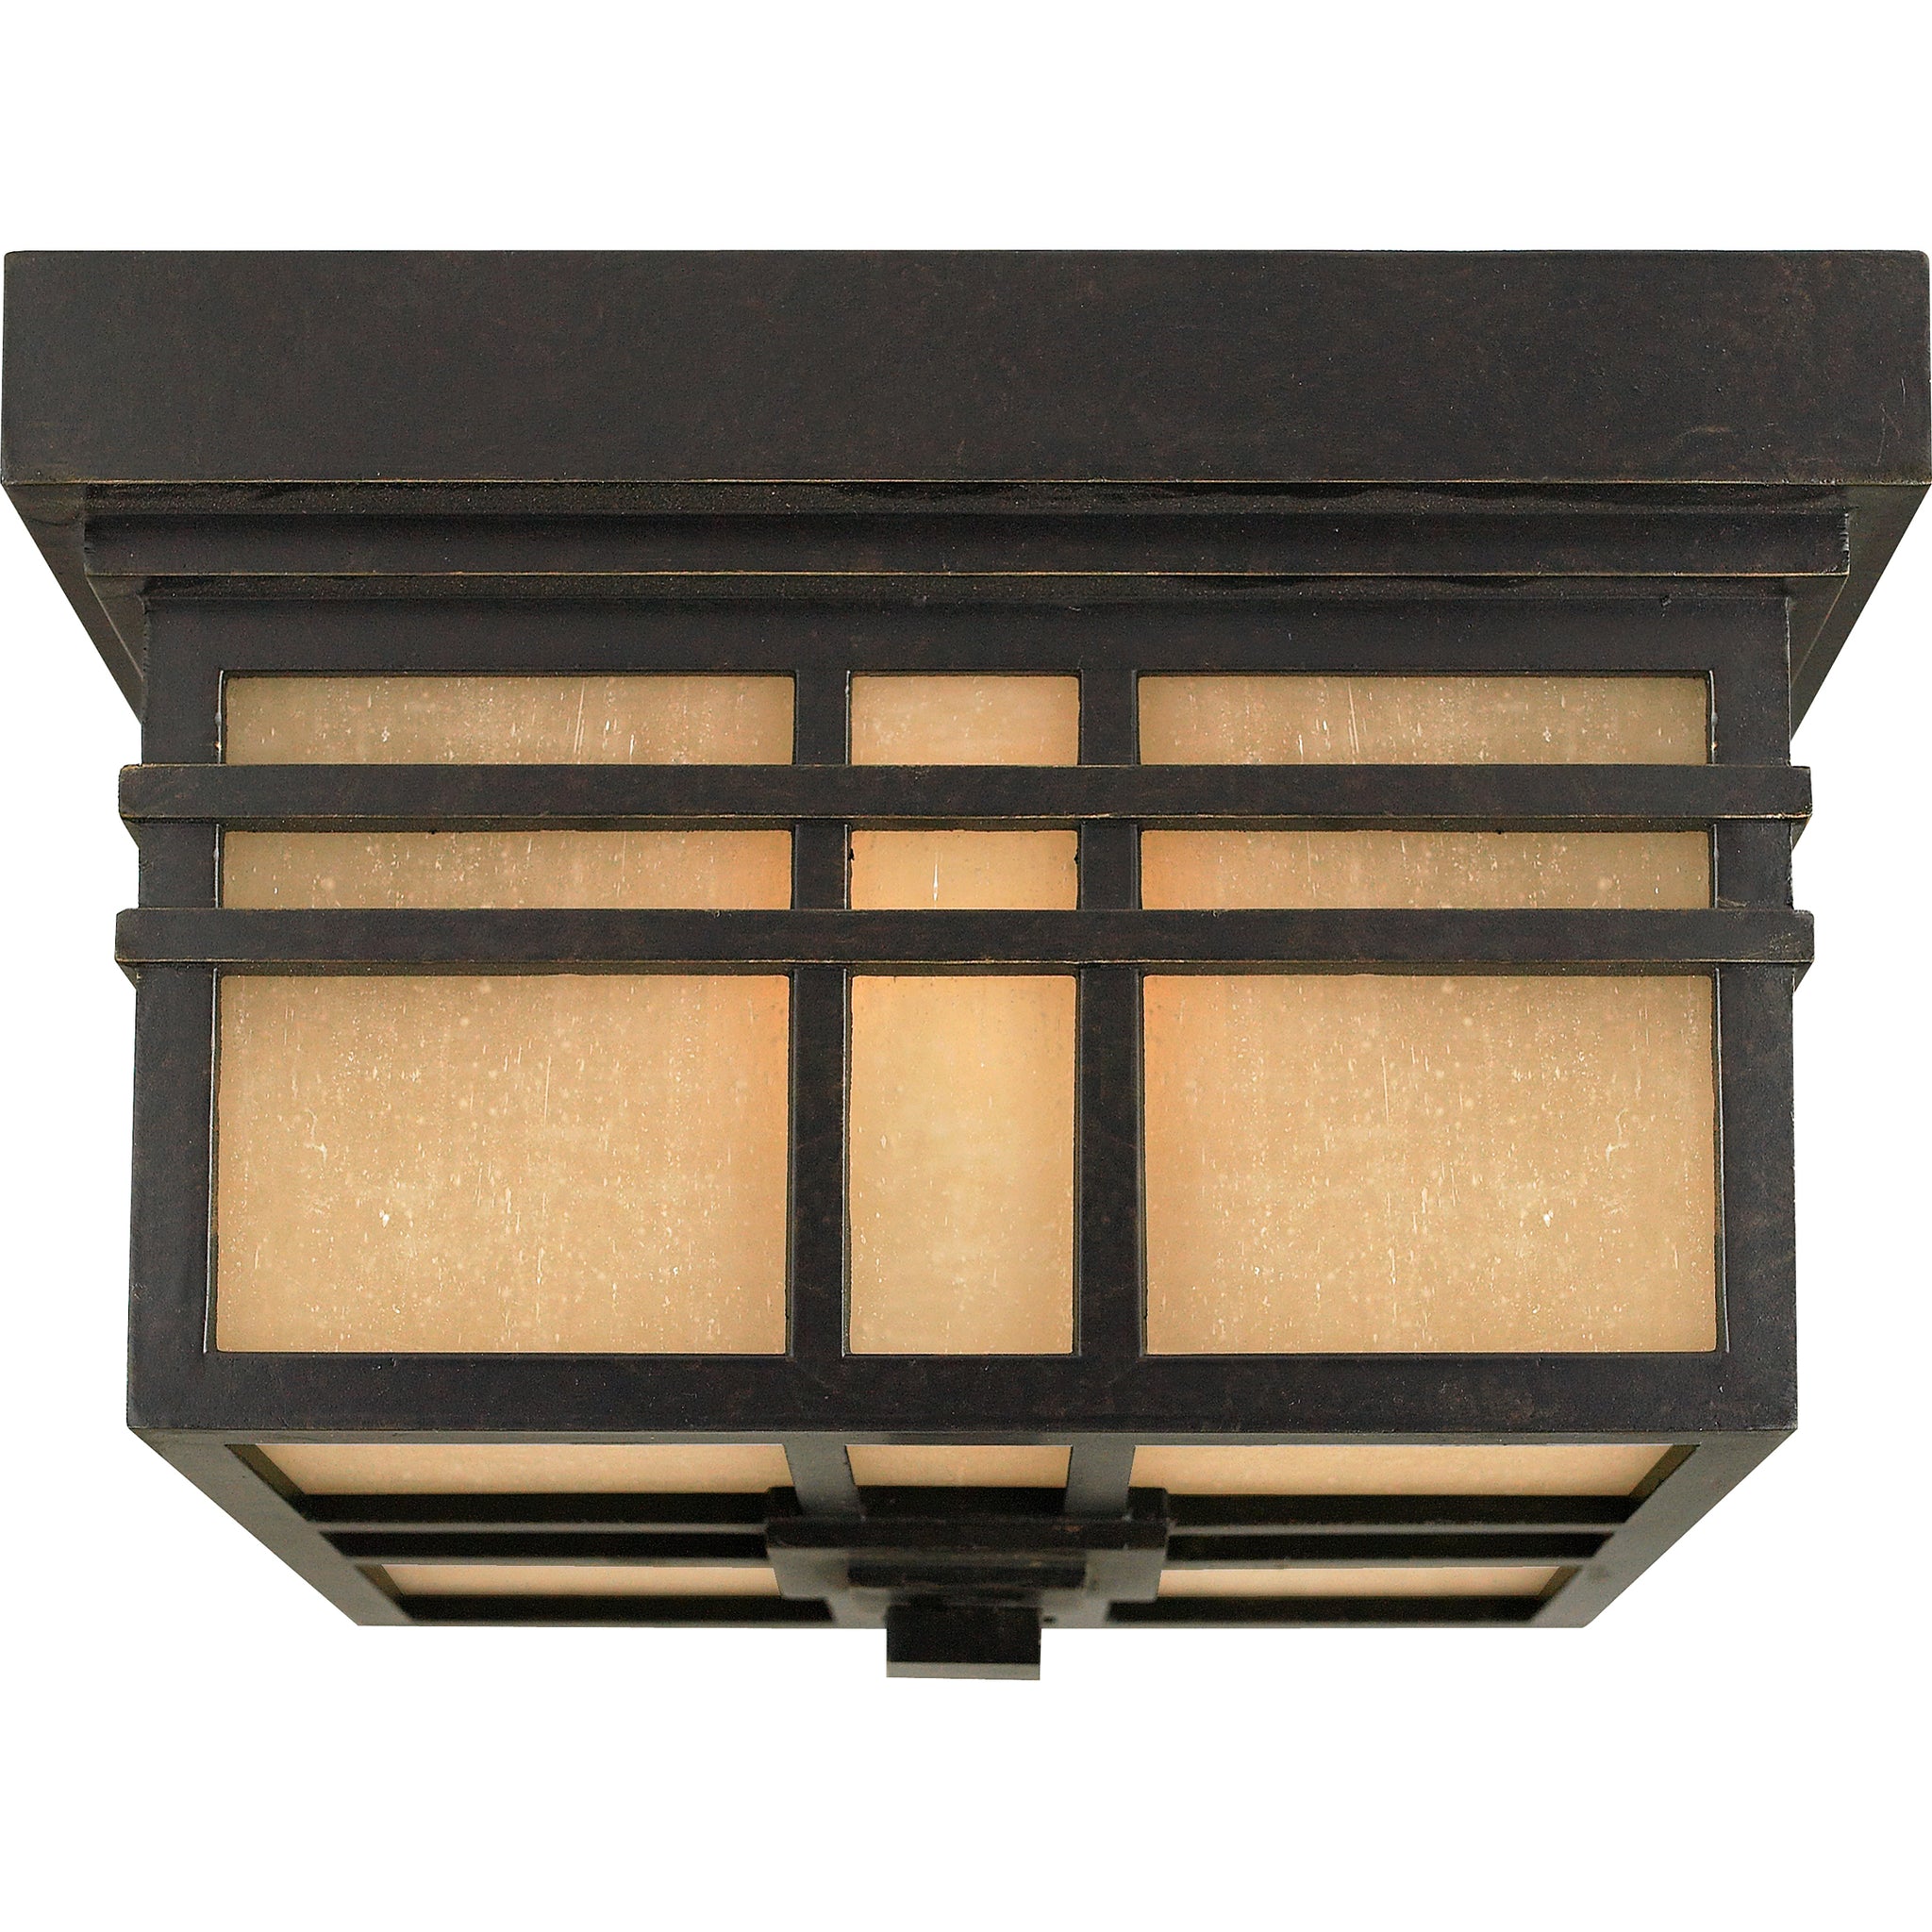 Hillcrest Outdoor Ceiling Light Imperial Bronze